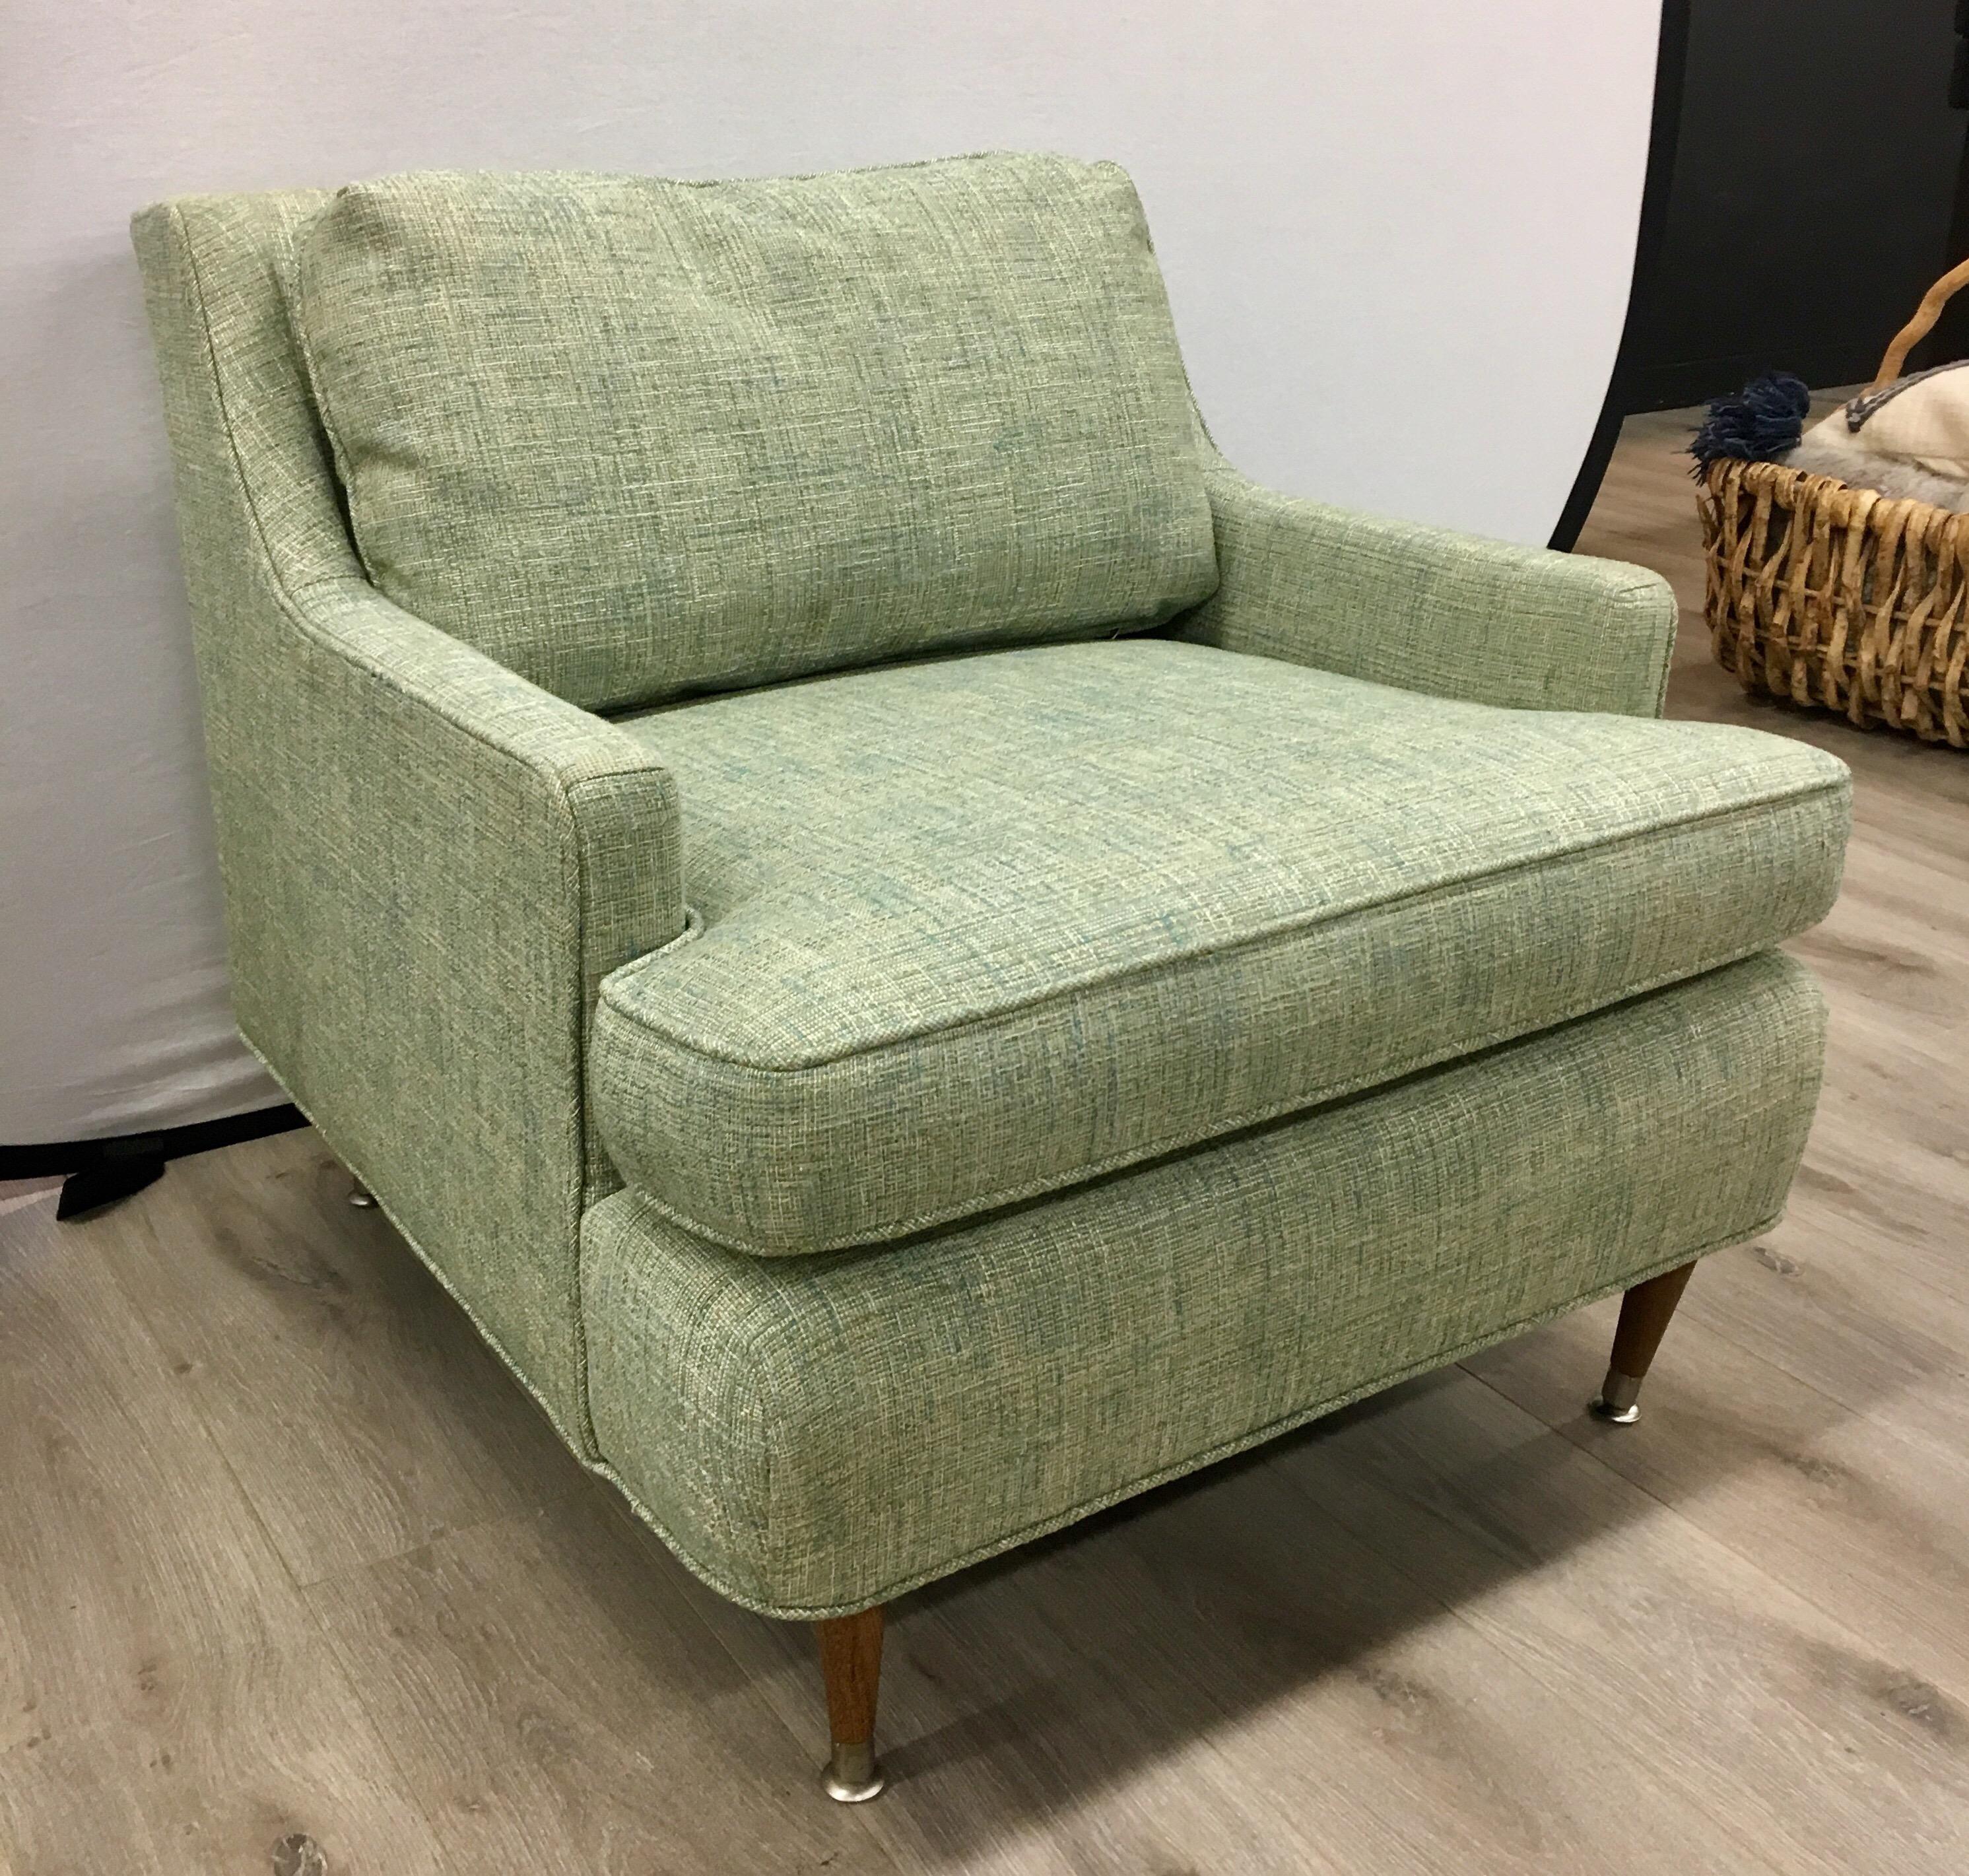 Newly reupholstered in a subtle pale green luxury fabric, these Danish modern lounge chairs from the 1970s are sure to impress.